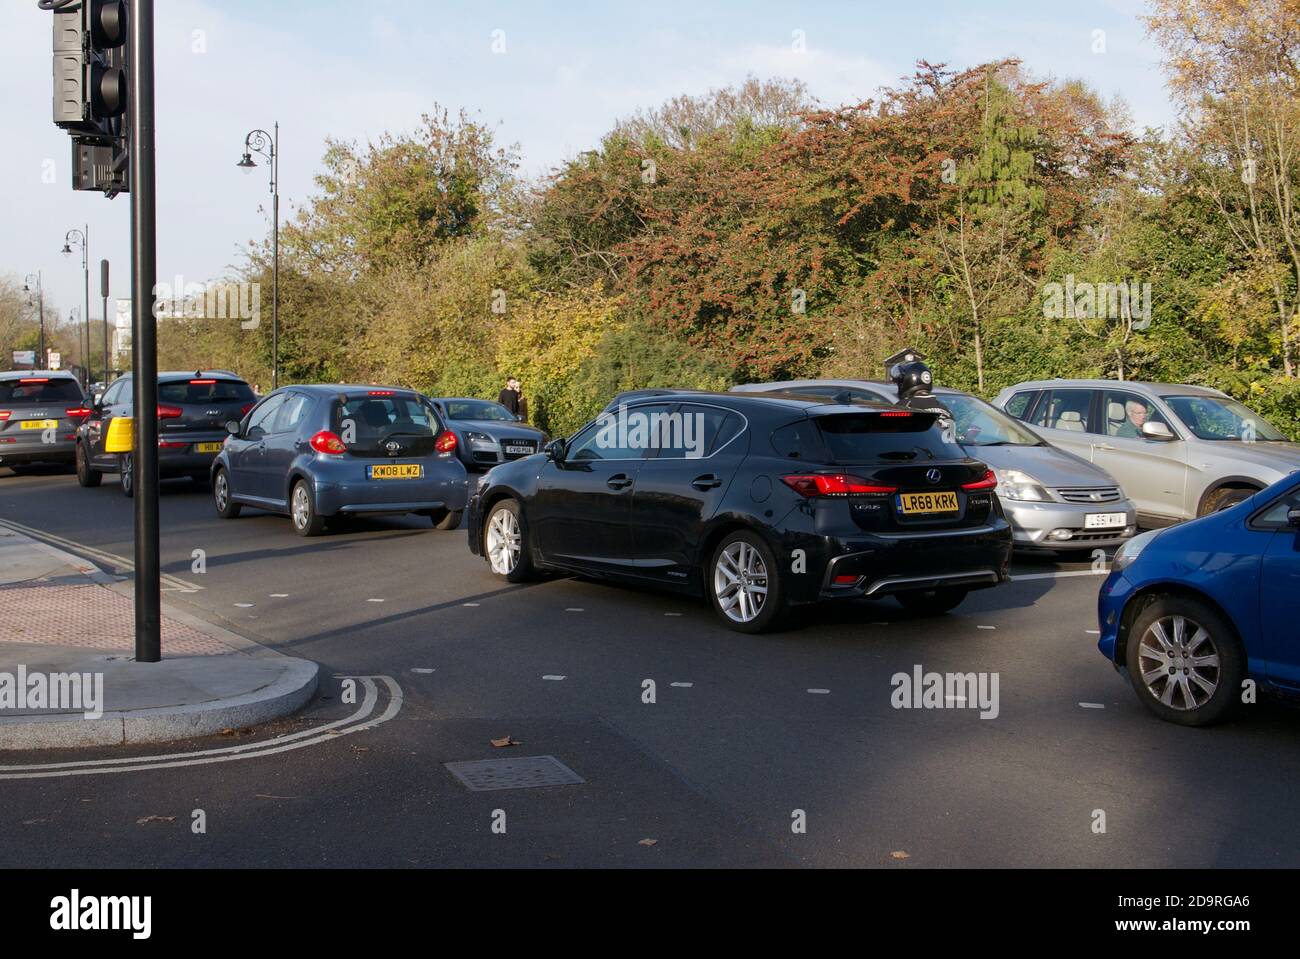 Standstill car traffic in Hampstead despite 'Stay at home' instruction during covid19 pandemic. Stock Photo